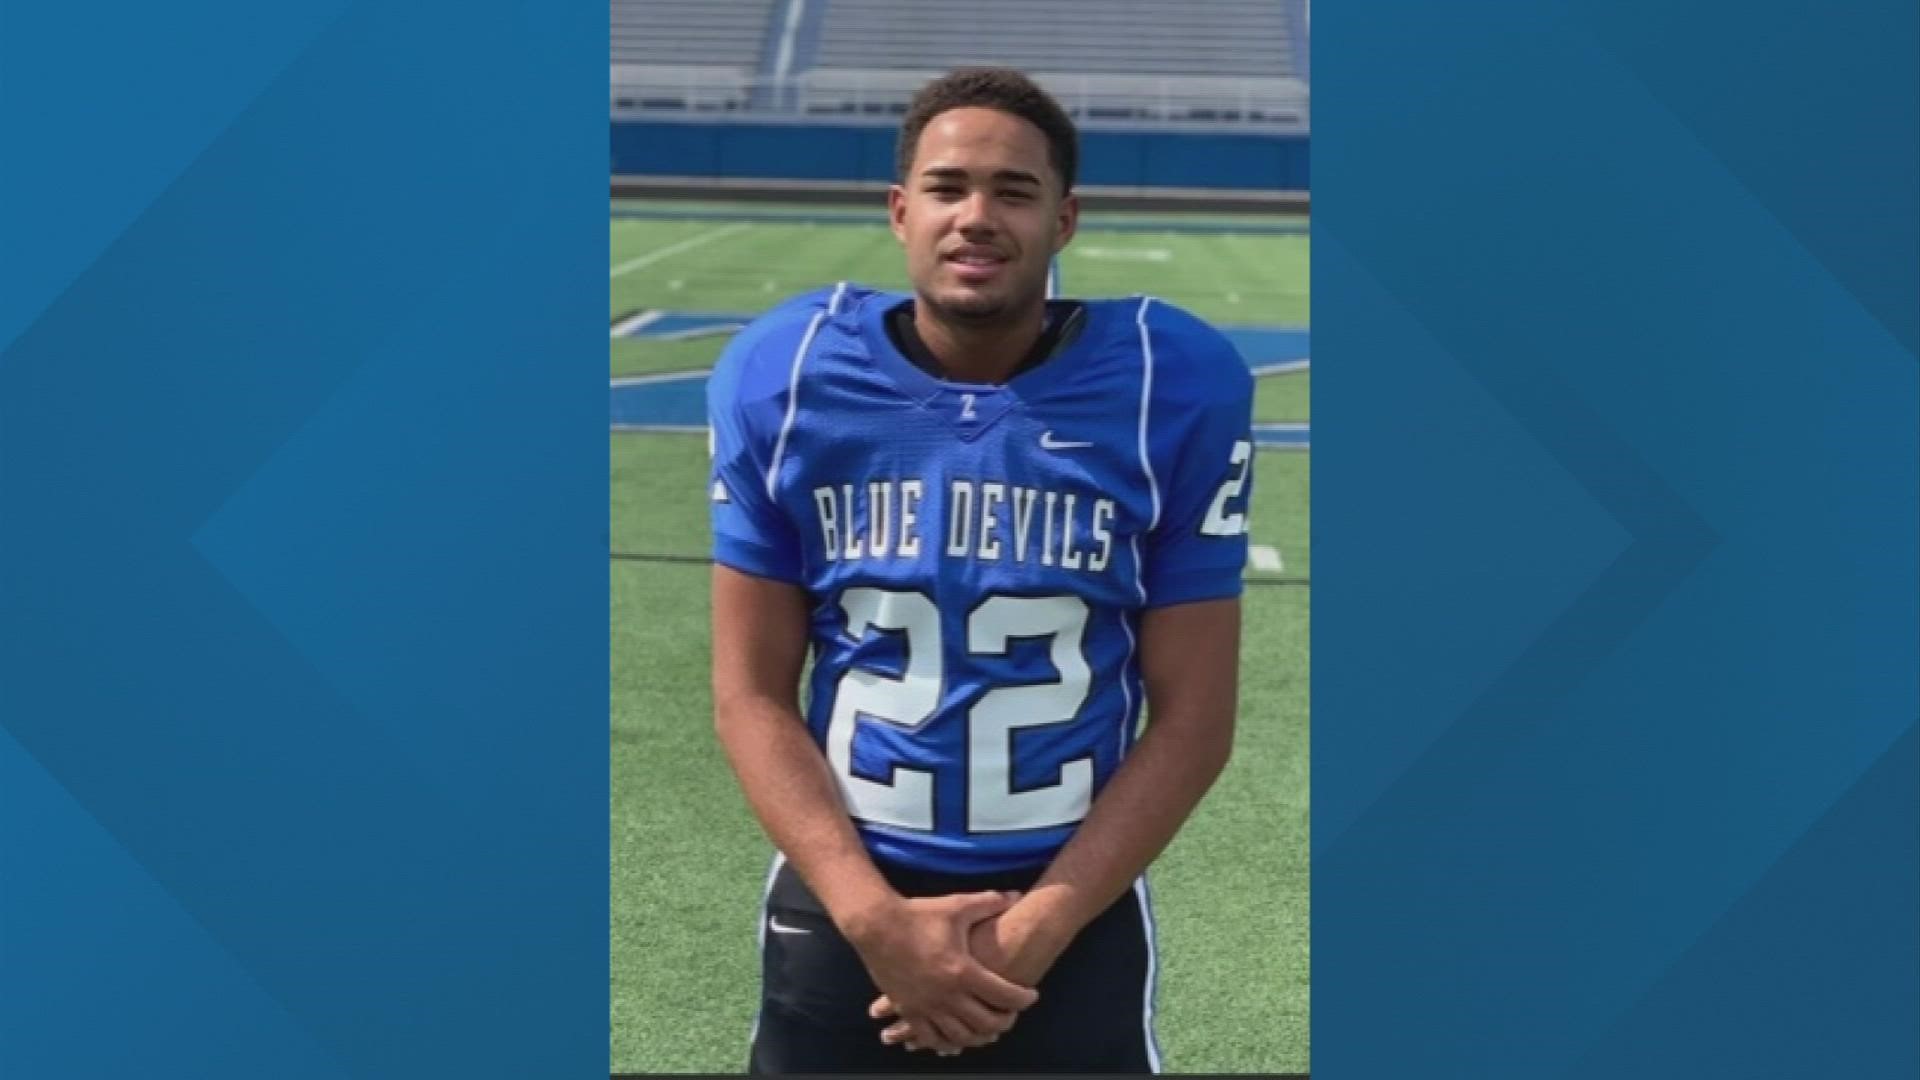 "We'll miss number 22." | The former football coach and family friend of a recent graduate who was found dead over the weekend is remembering him fondly.